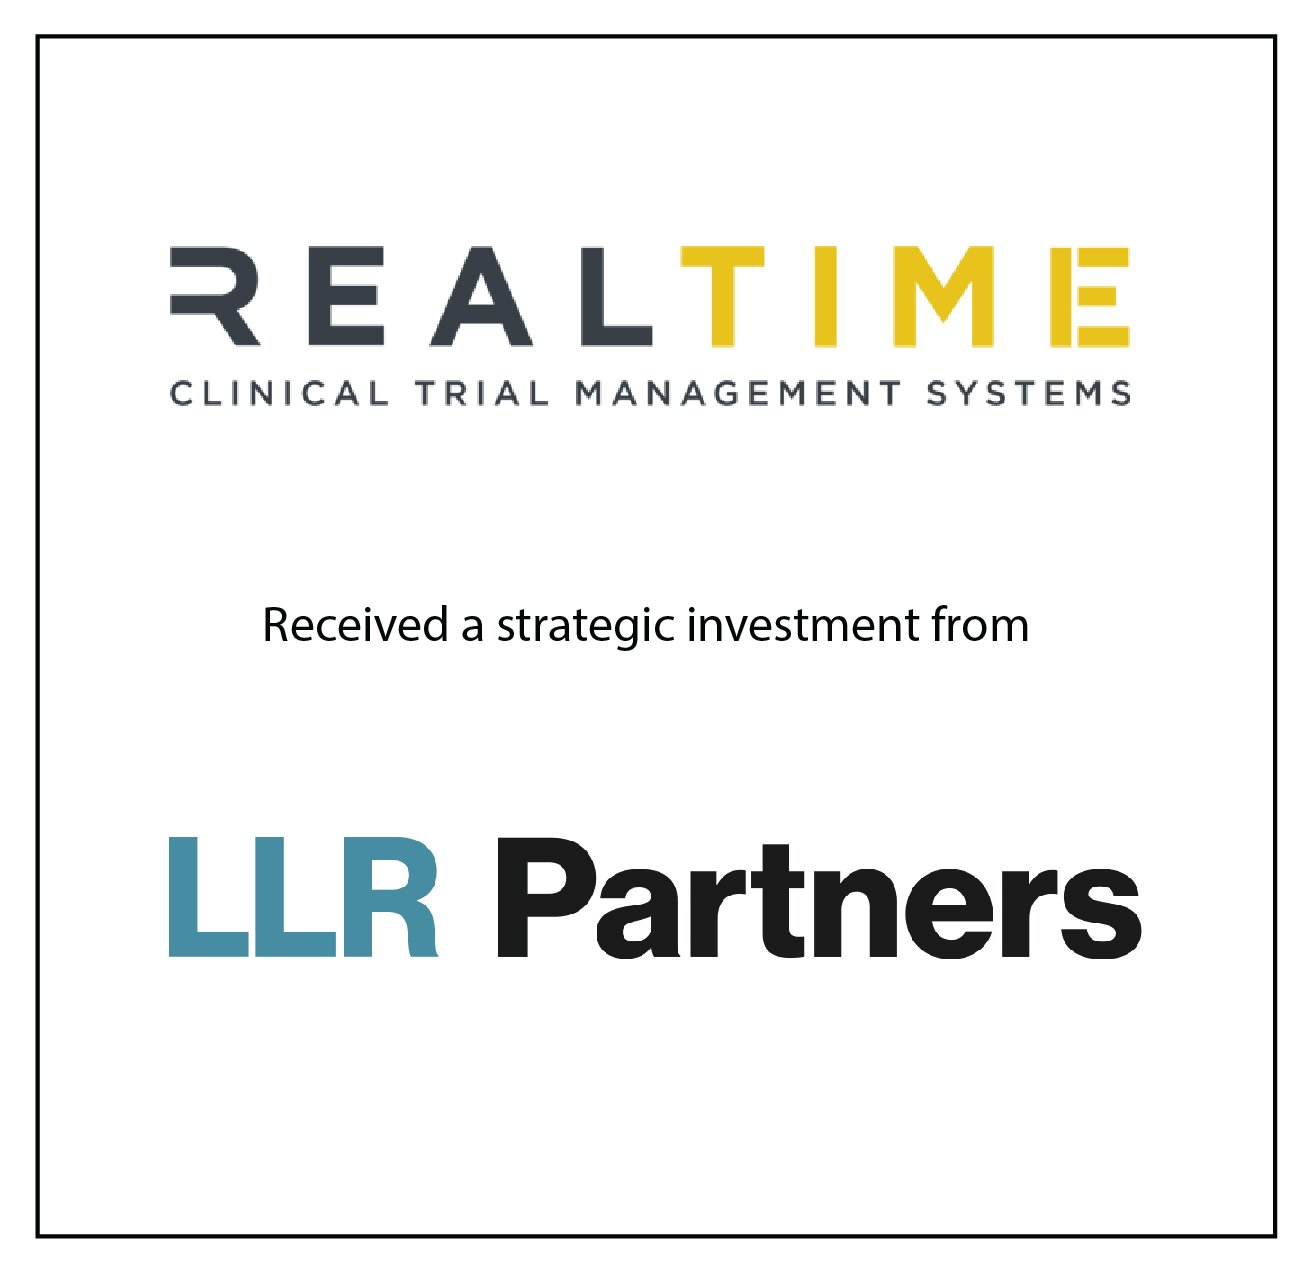 RealTime Software Solutions Receives Strategic Investment from LLR Partners to Accelerate Growth and Product Innovation